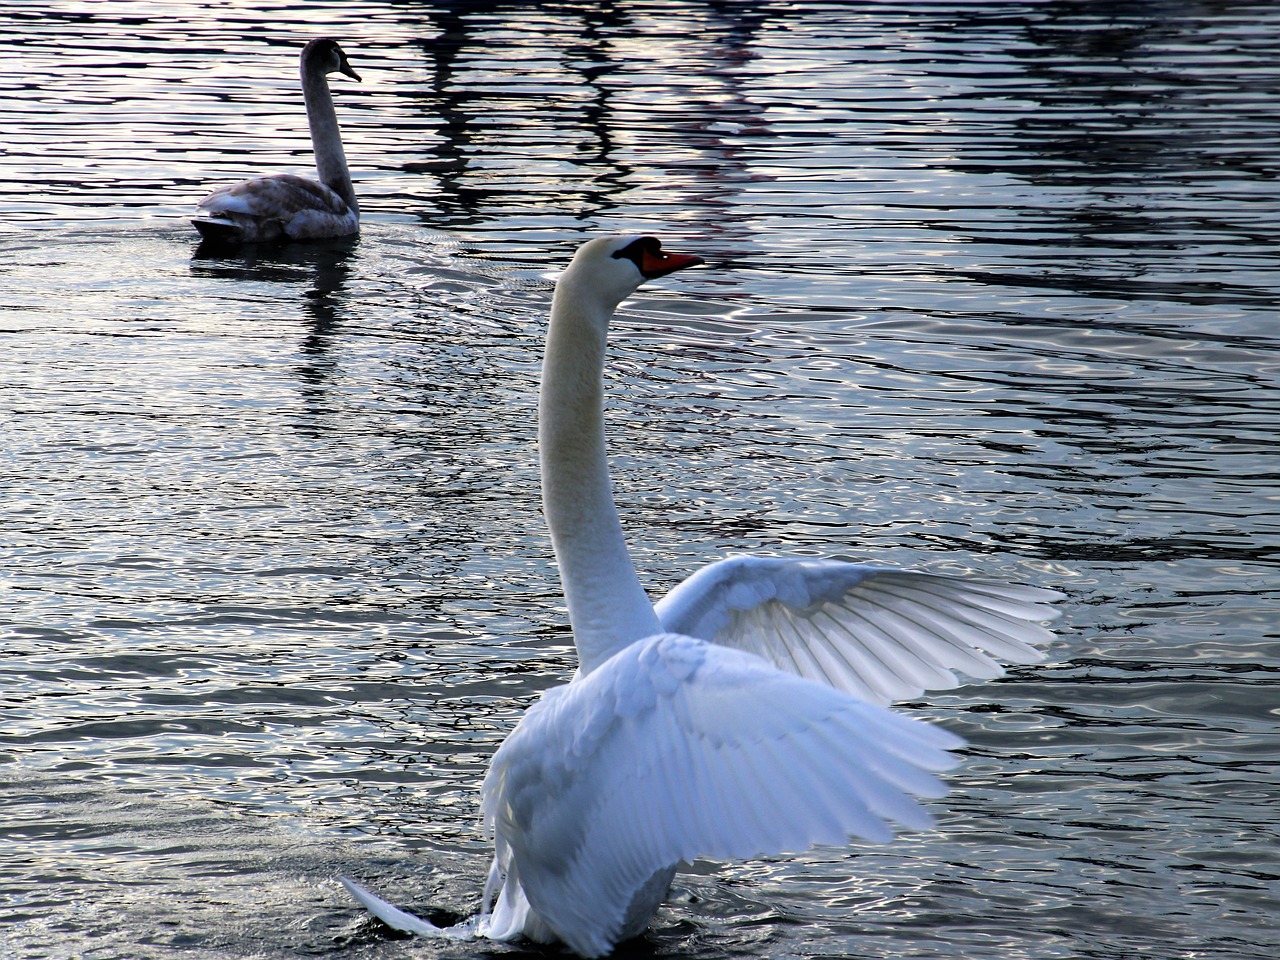 a swan flapping its wings in the water, flickr, arabesque, male and female, winter sun, img_975.raw, early evening